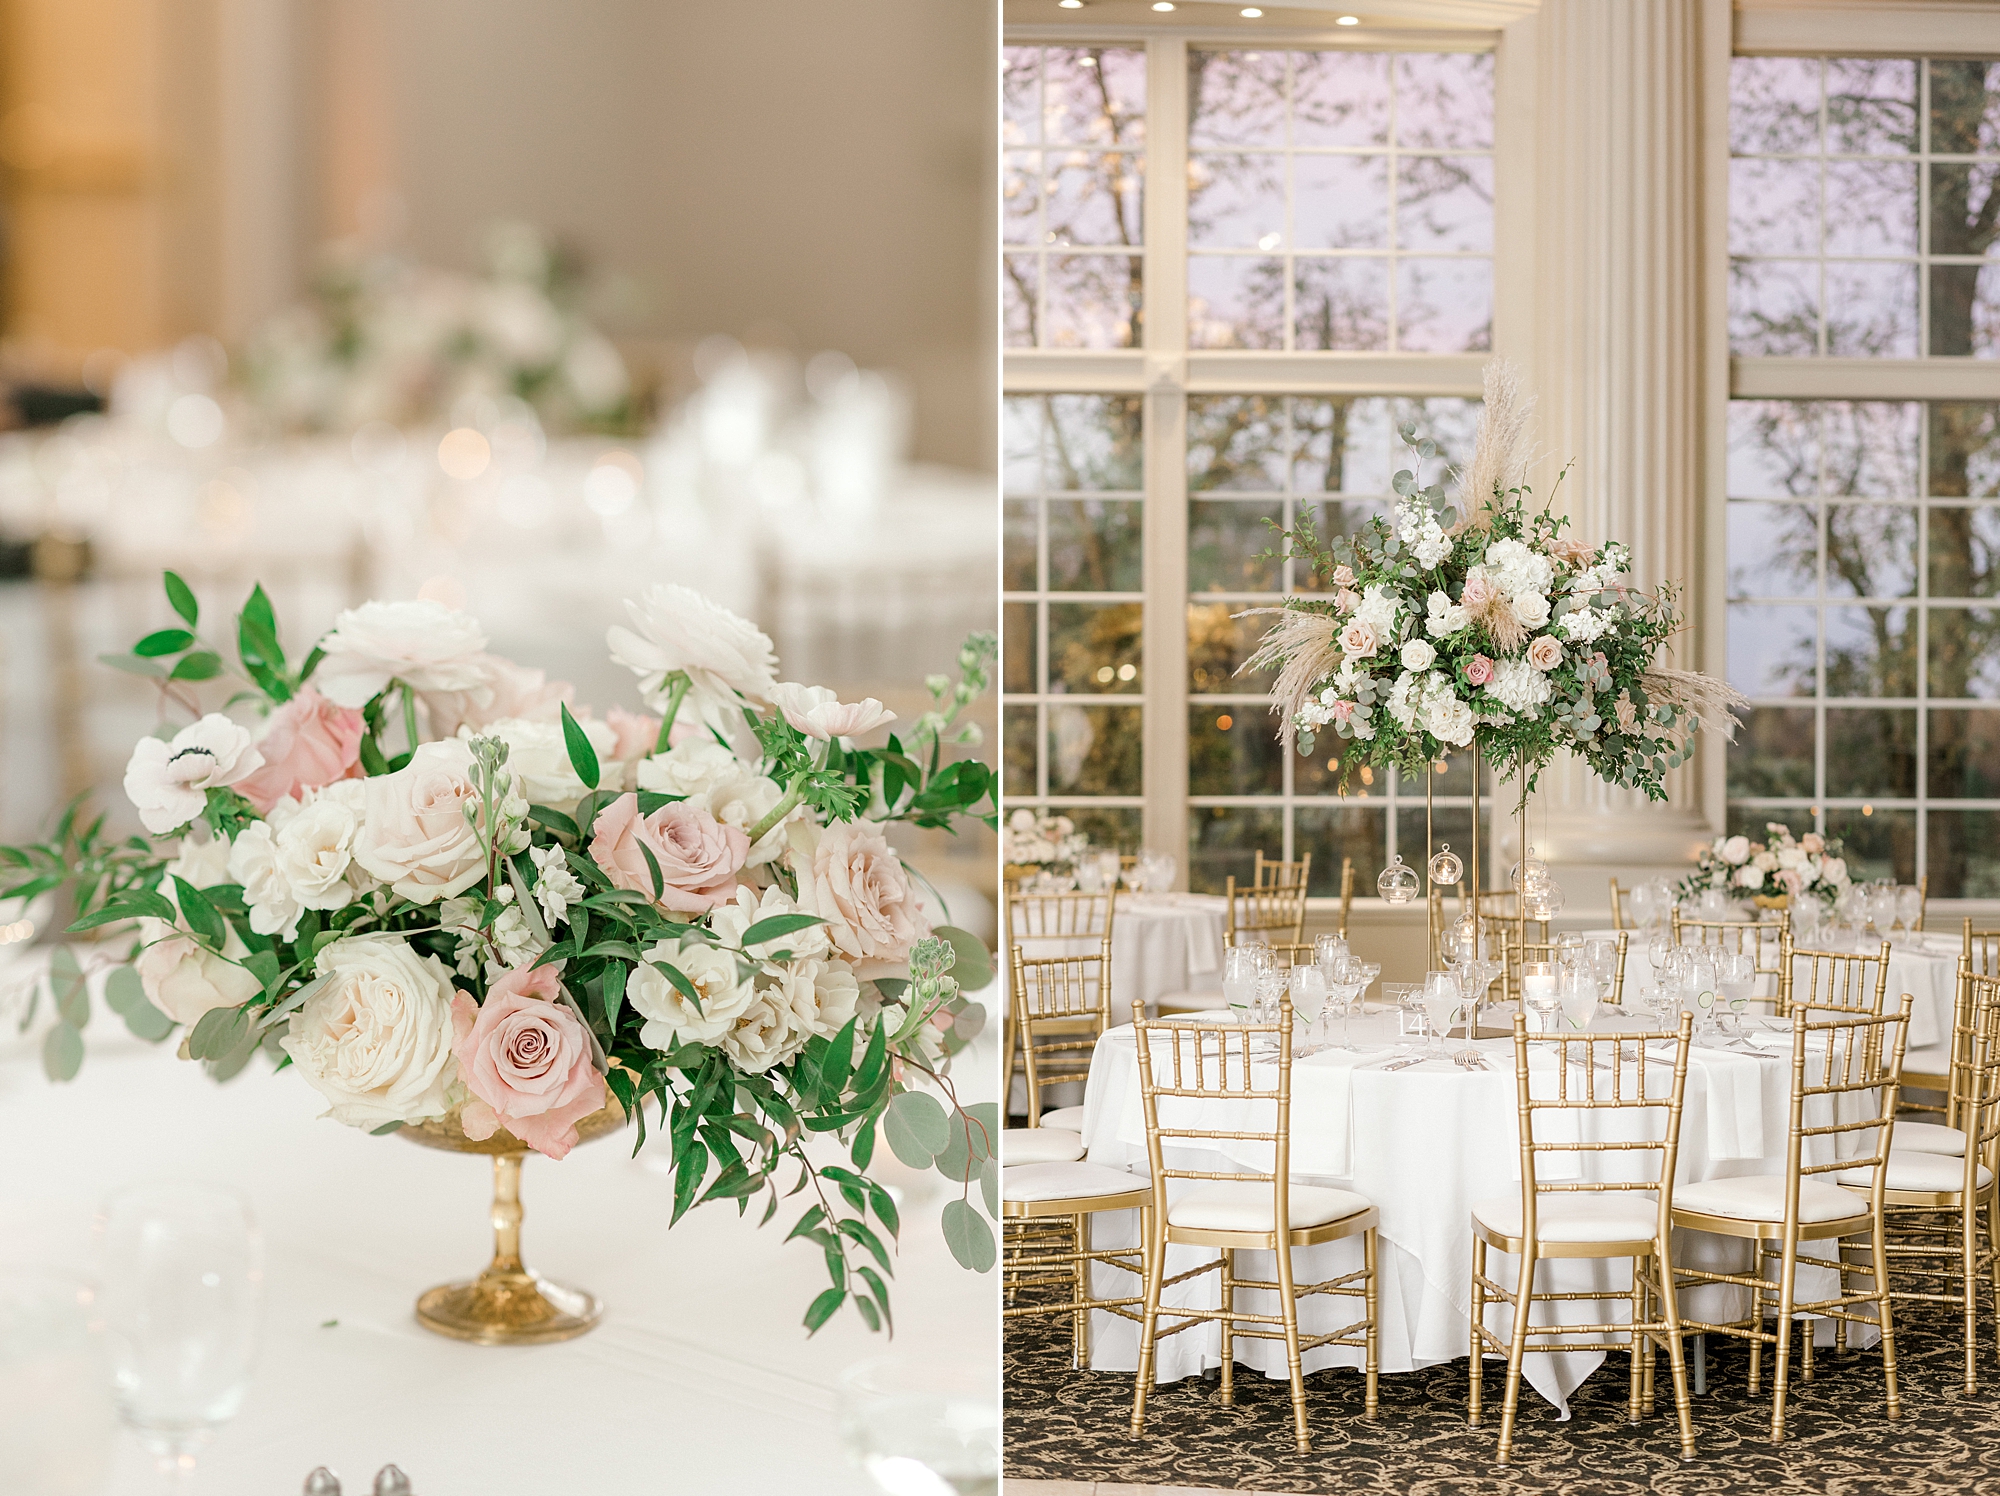 wedding reception centerpieces with white pink and flowers